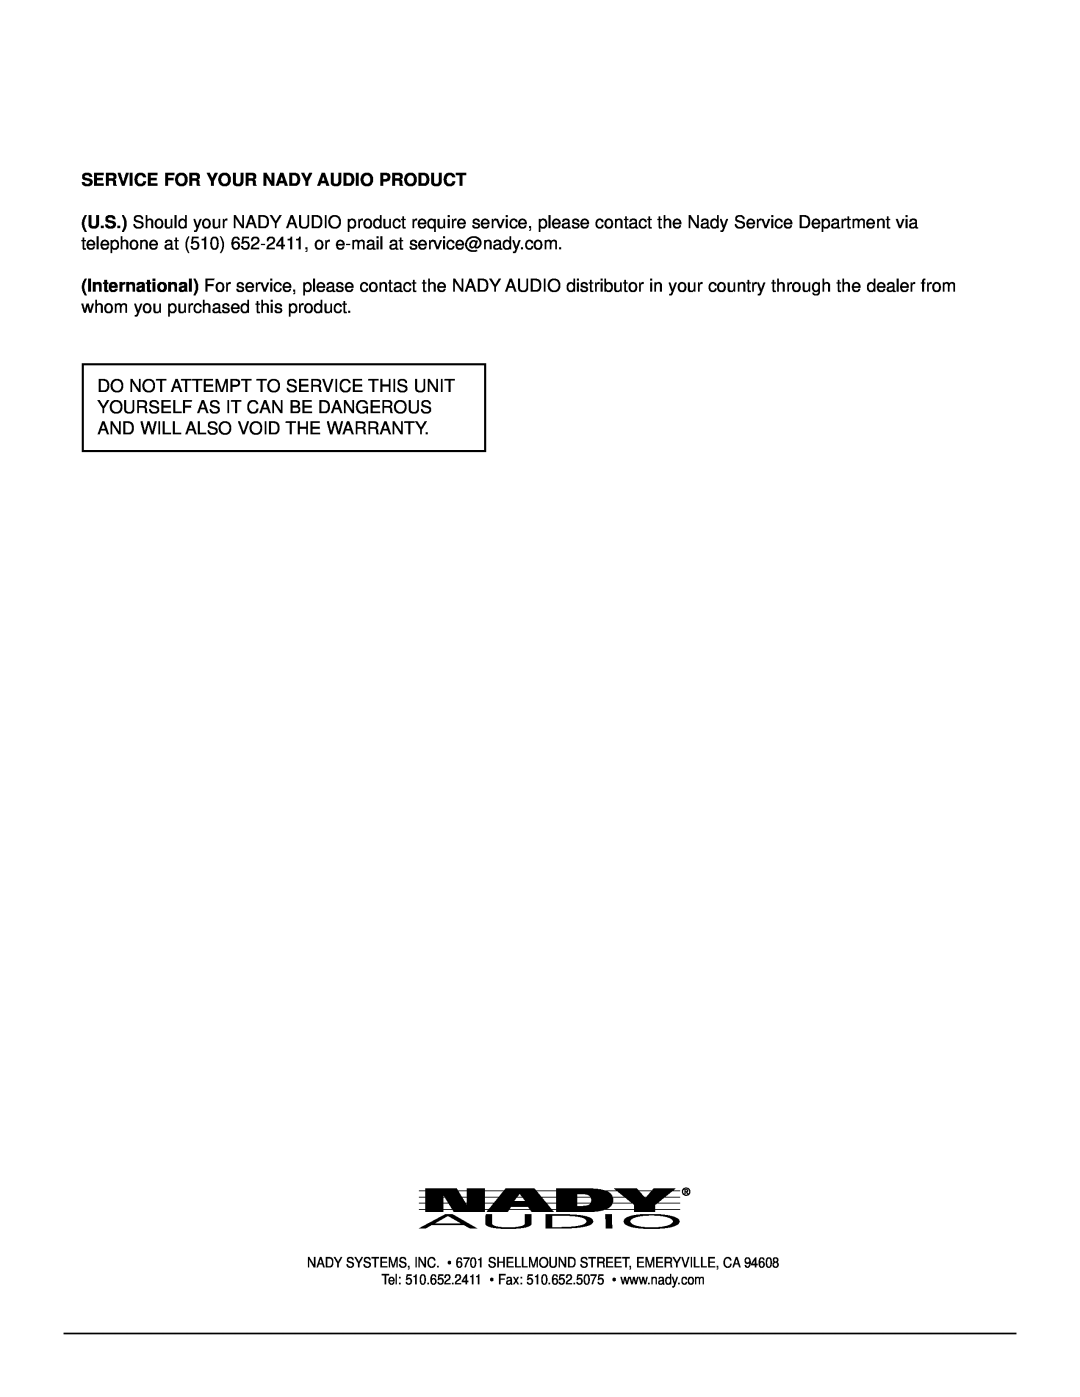 Nady Systems SD-2418 owner manual Service For Your Nady Audio Product 